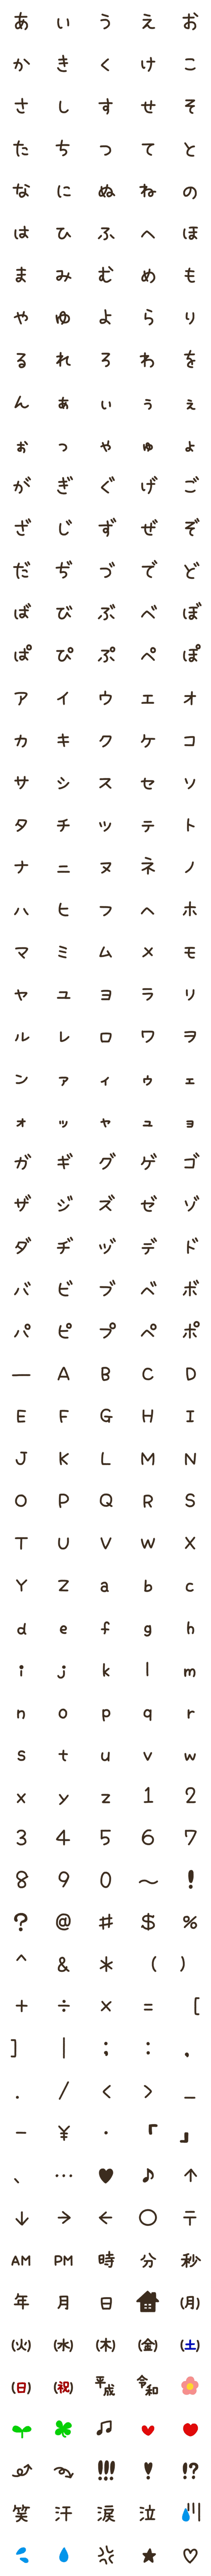 [LINE絵文字]サーーーーーモン絵文字の画像一覧